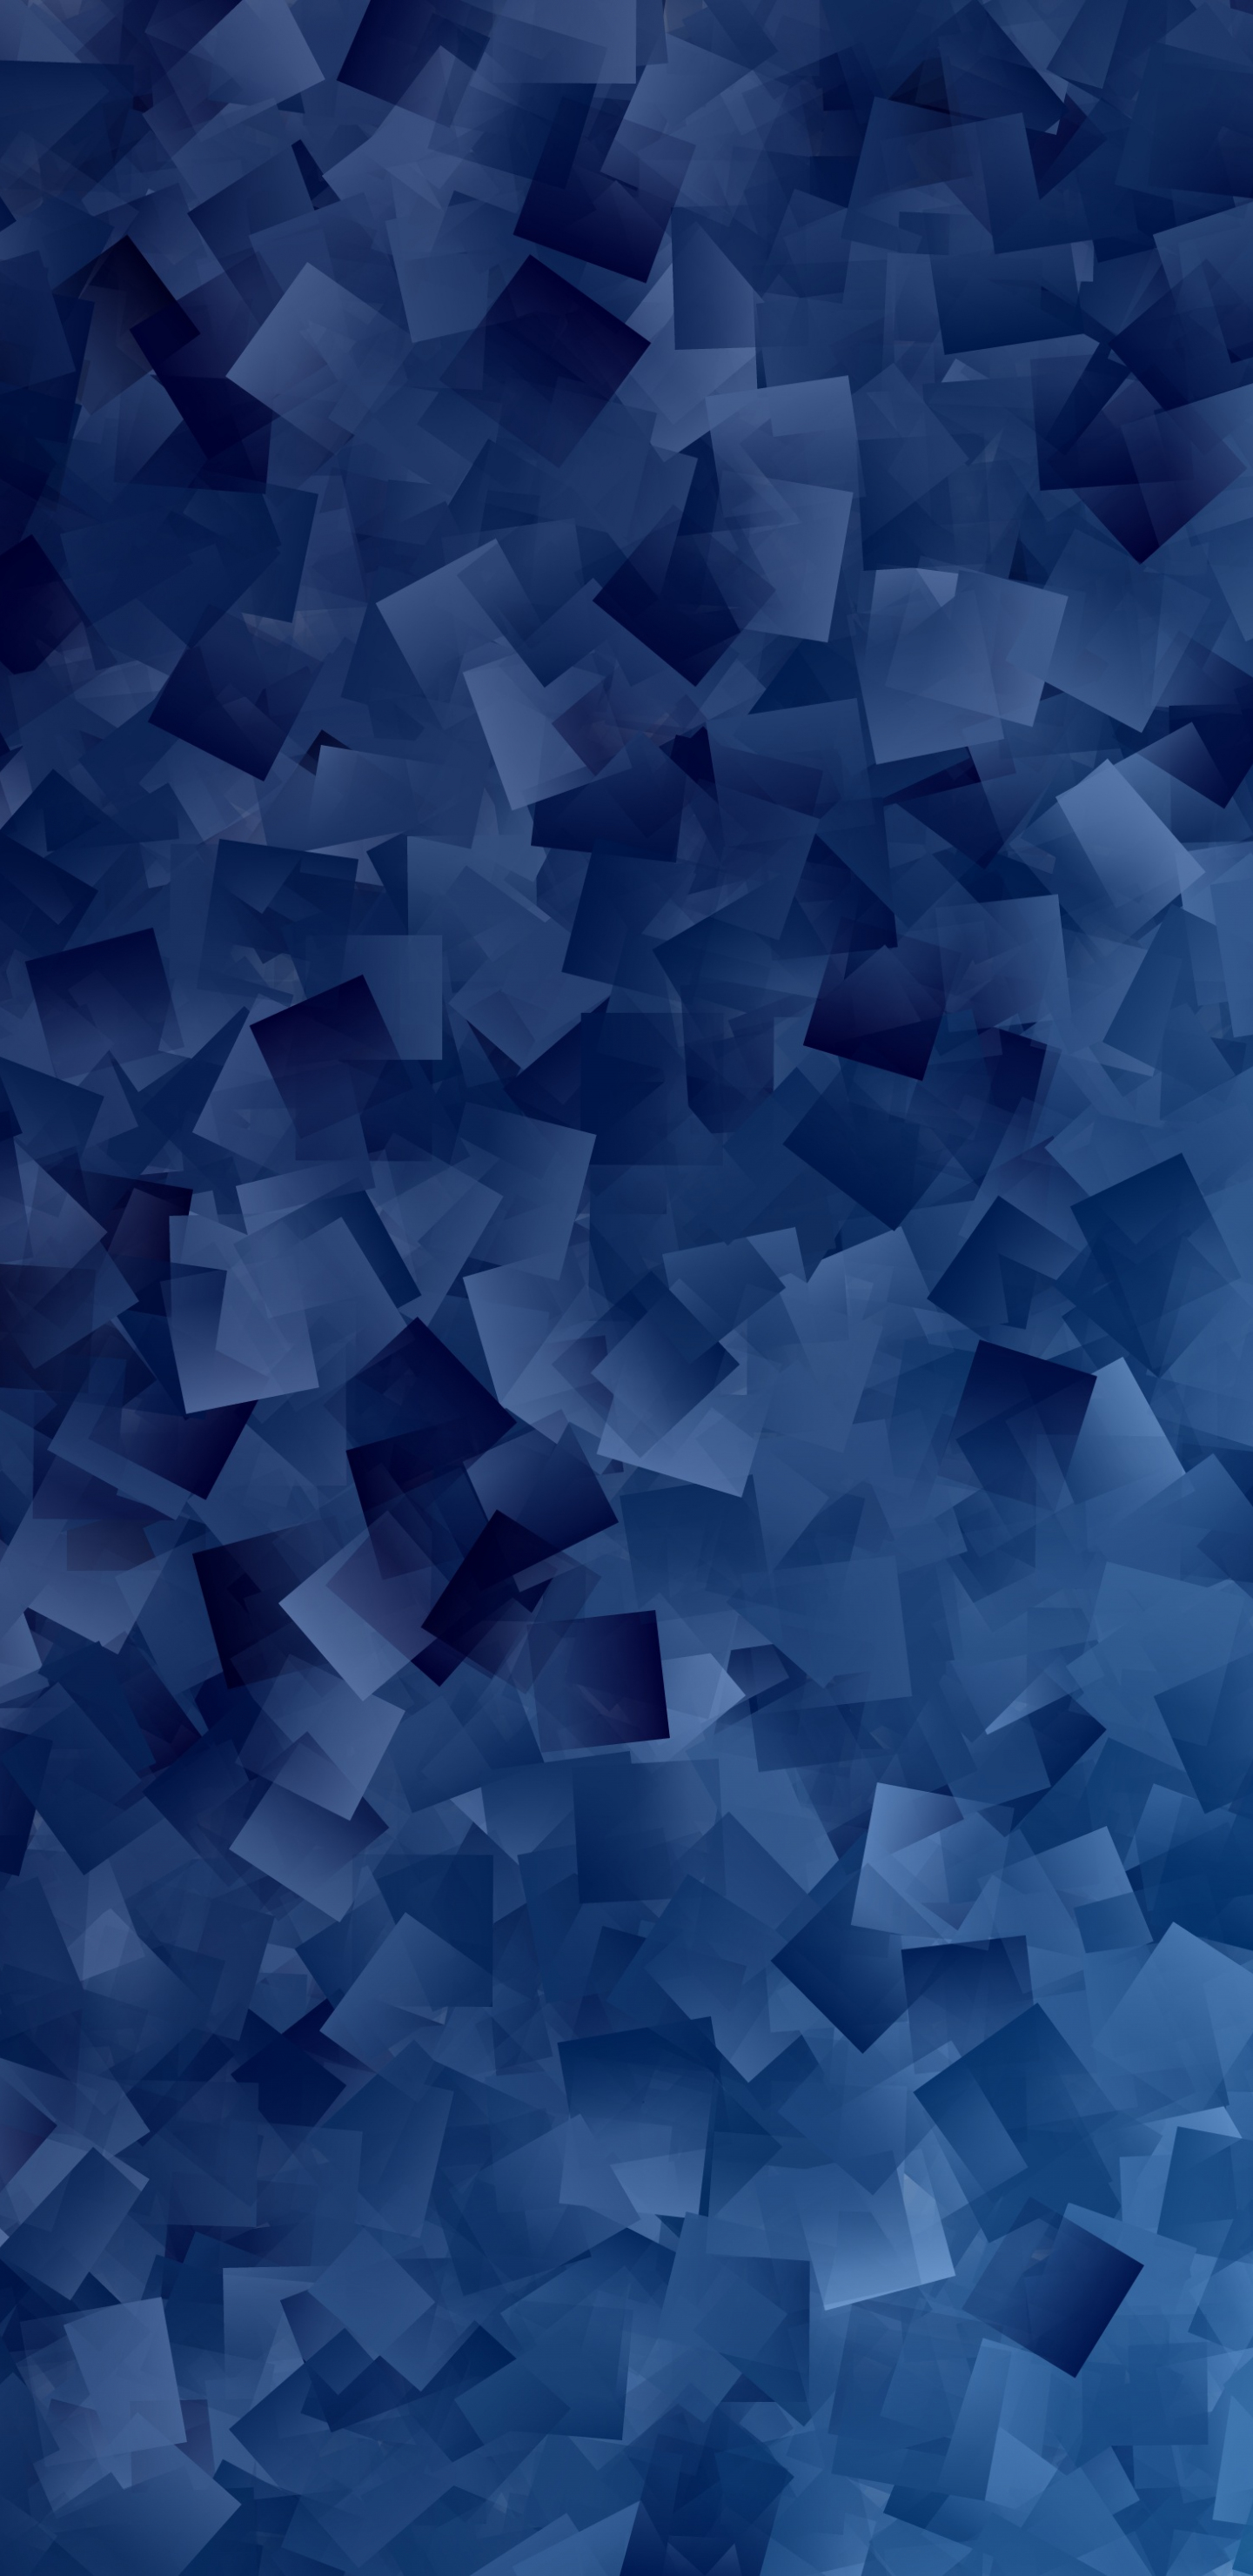 Download 1440x2960 wallpaper abstract